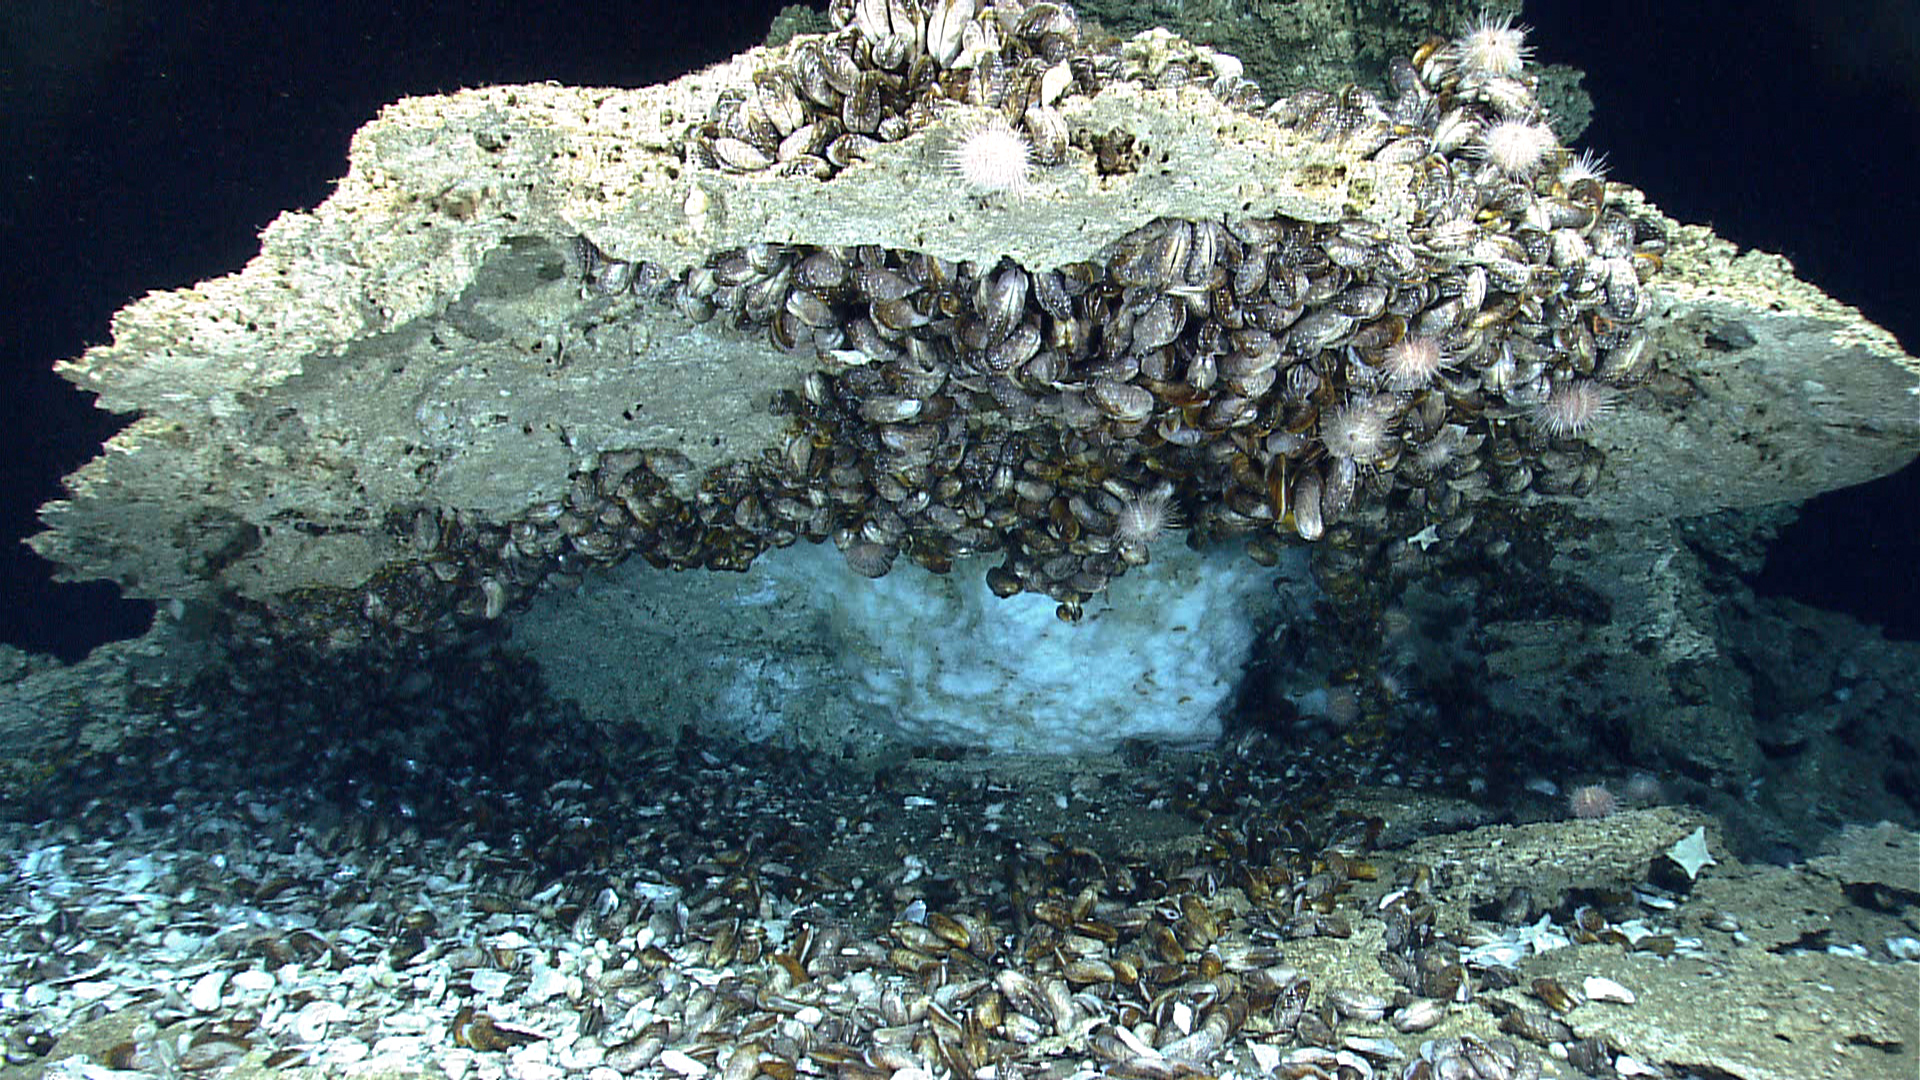 A dense colony of chemosynthetic mussels growing next to methane hydrate at a seep site in the Gulf of Mexico. 